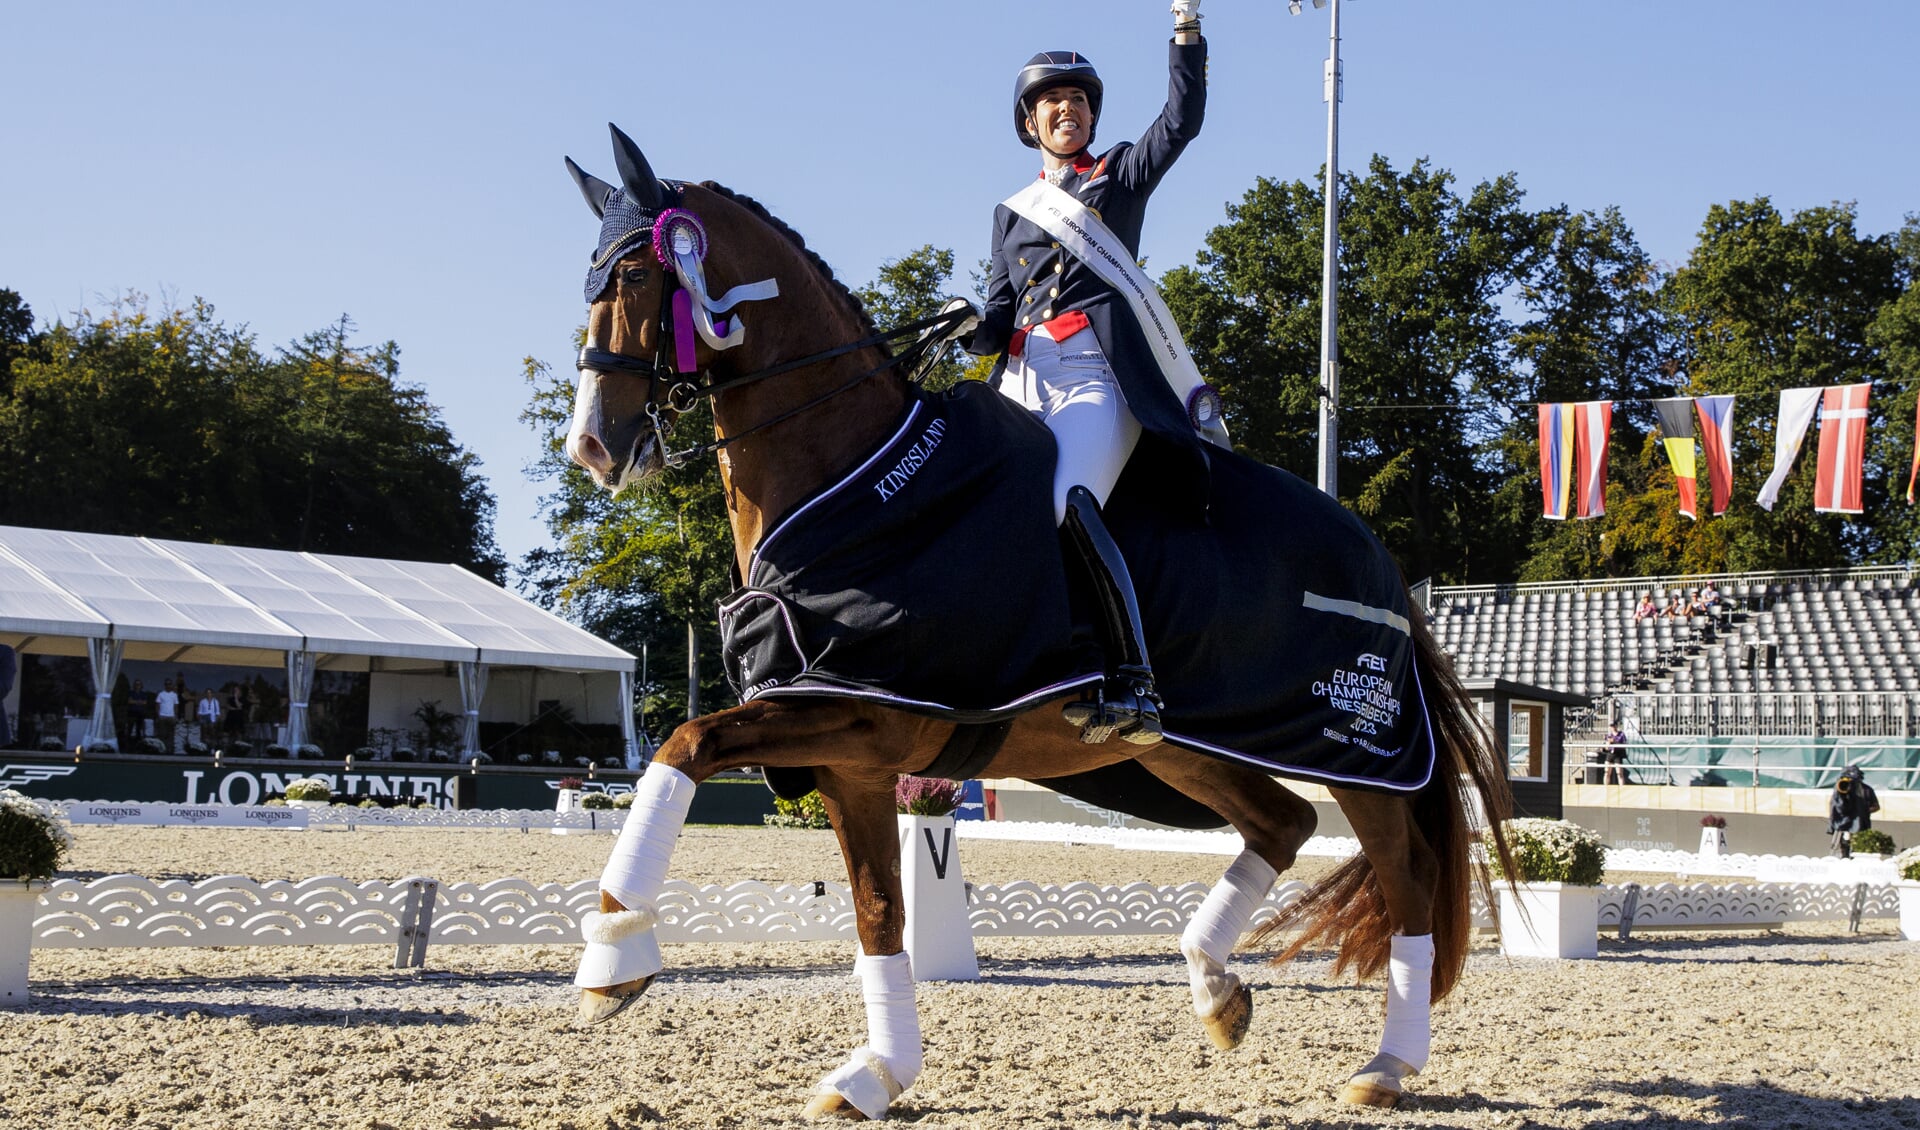 Charlotte Dujardin (GBR) riding Imhotep part of the winning team Great Britain ©FEI/Leanjo de Koster